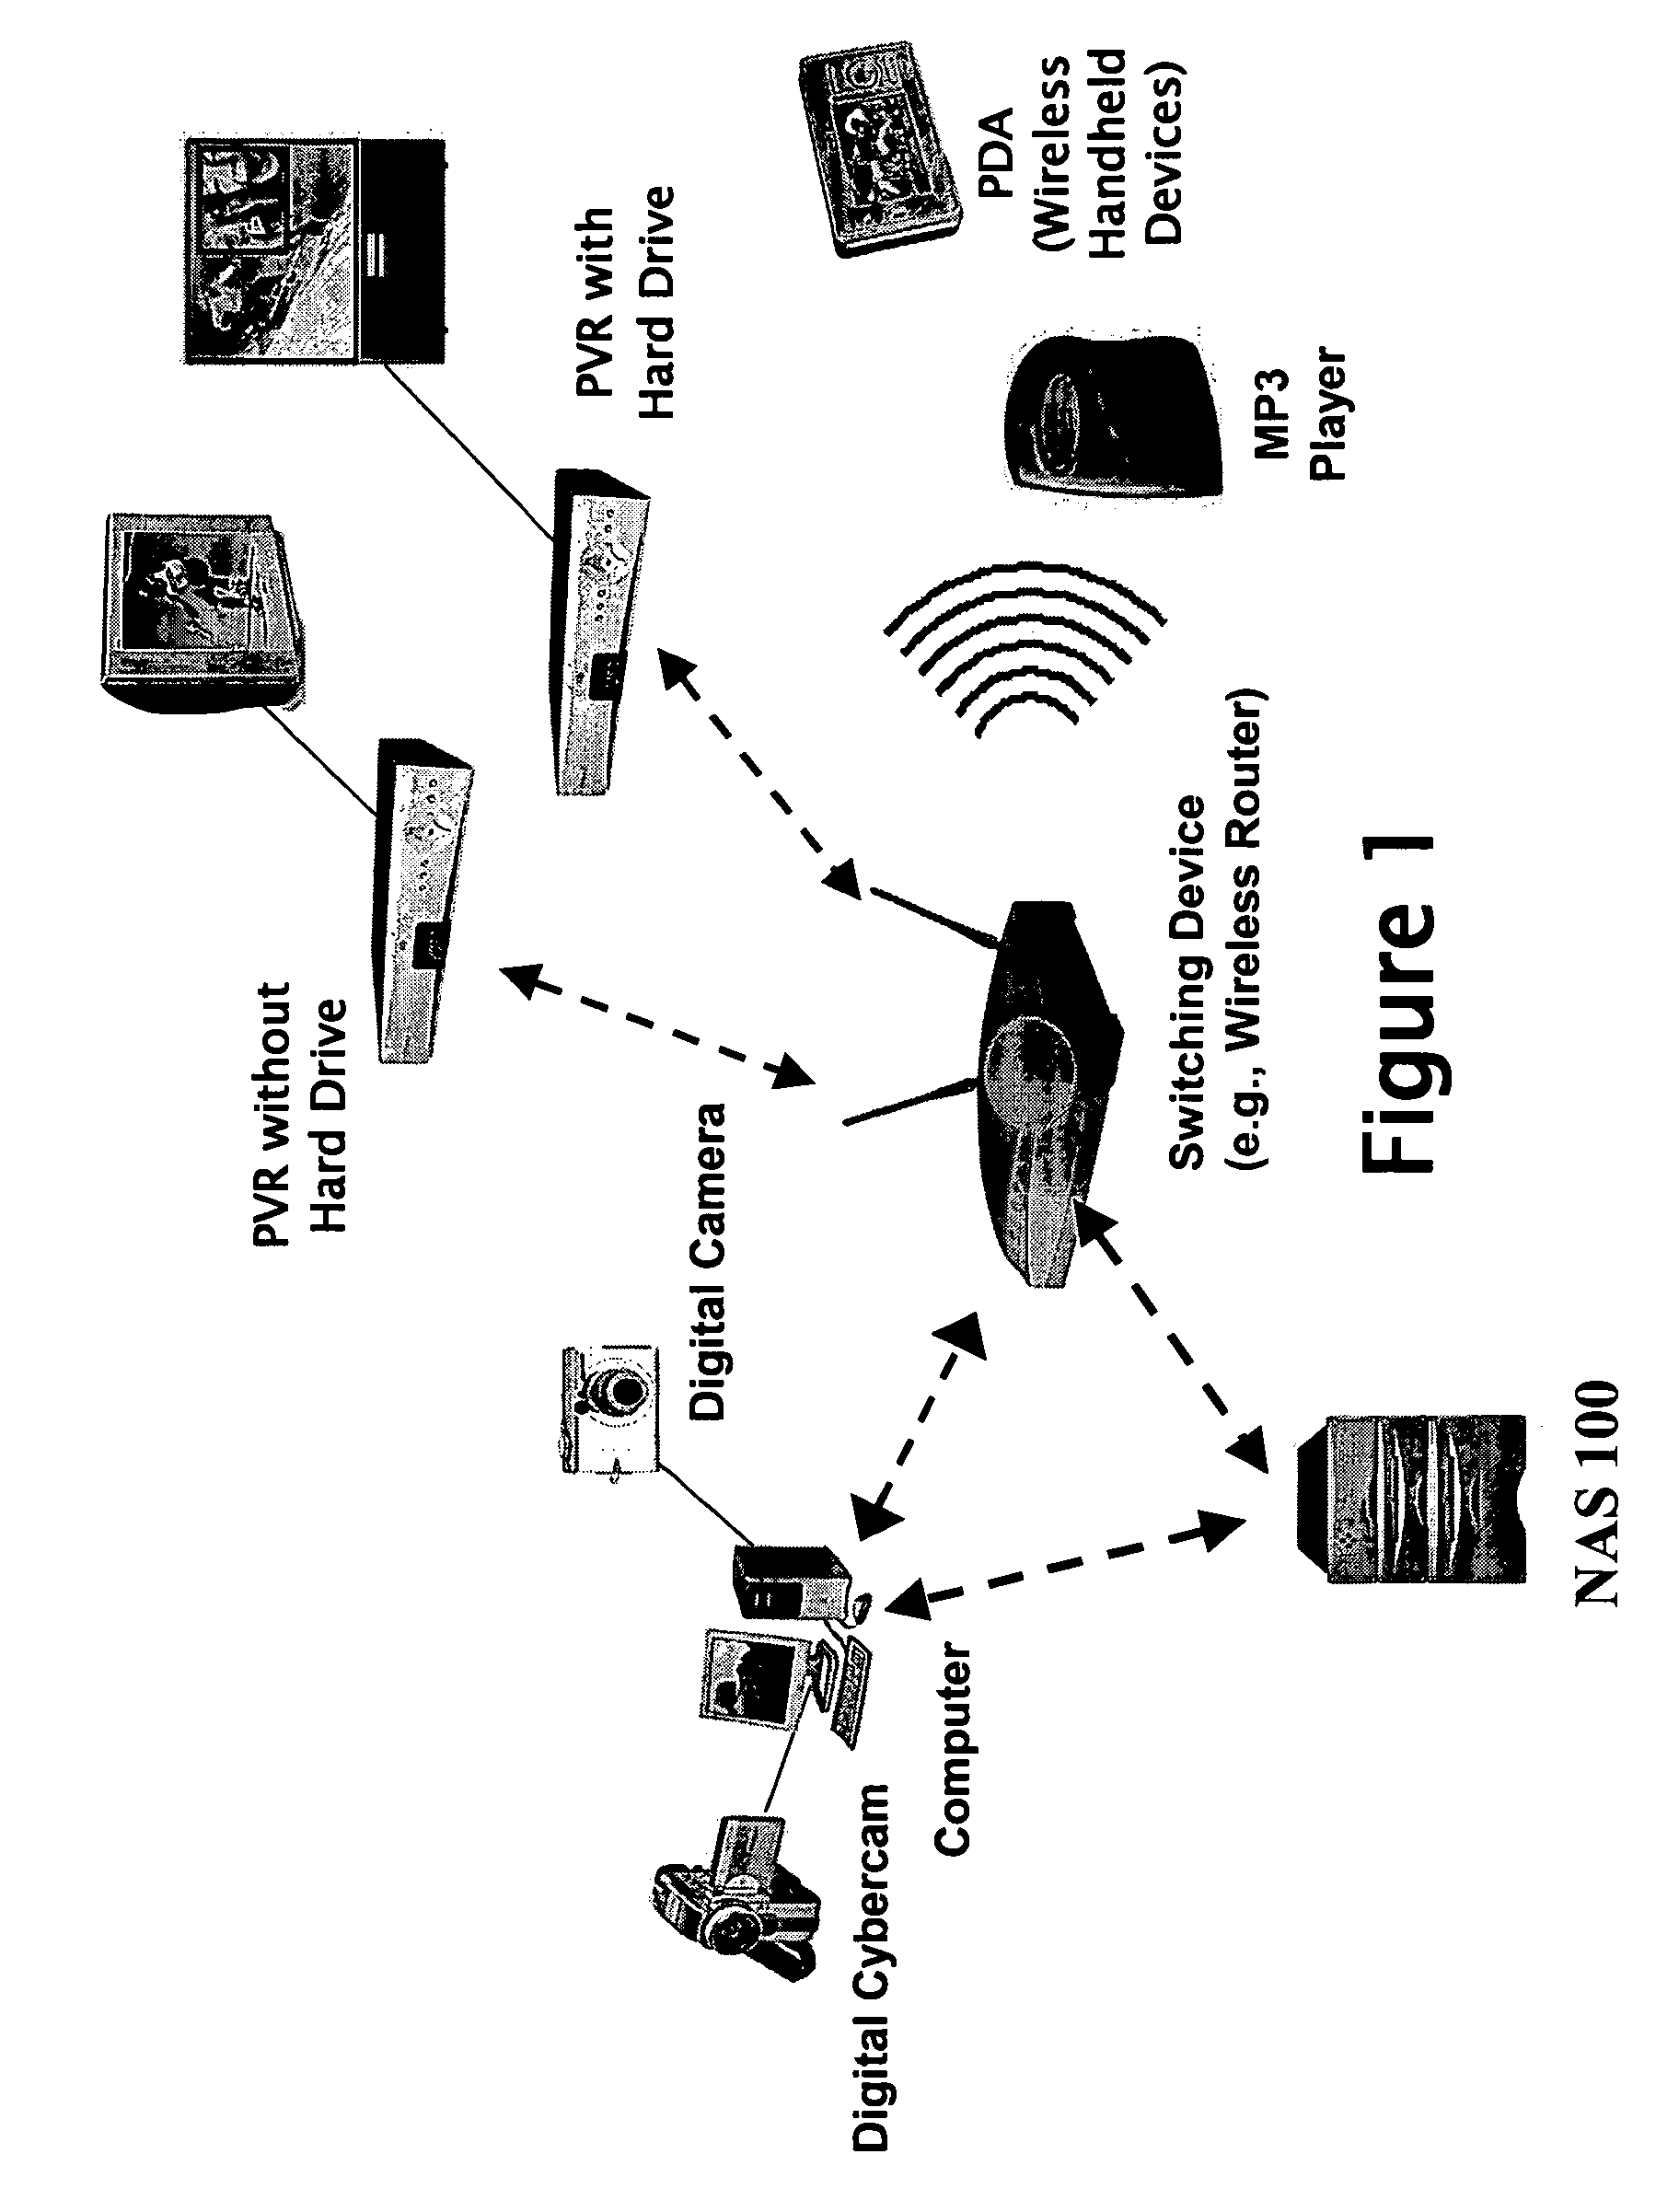 Data storage system and method that supports personal video recorder functionality